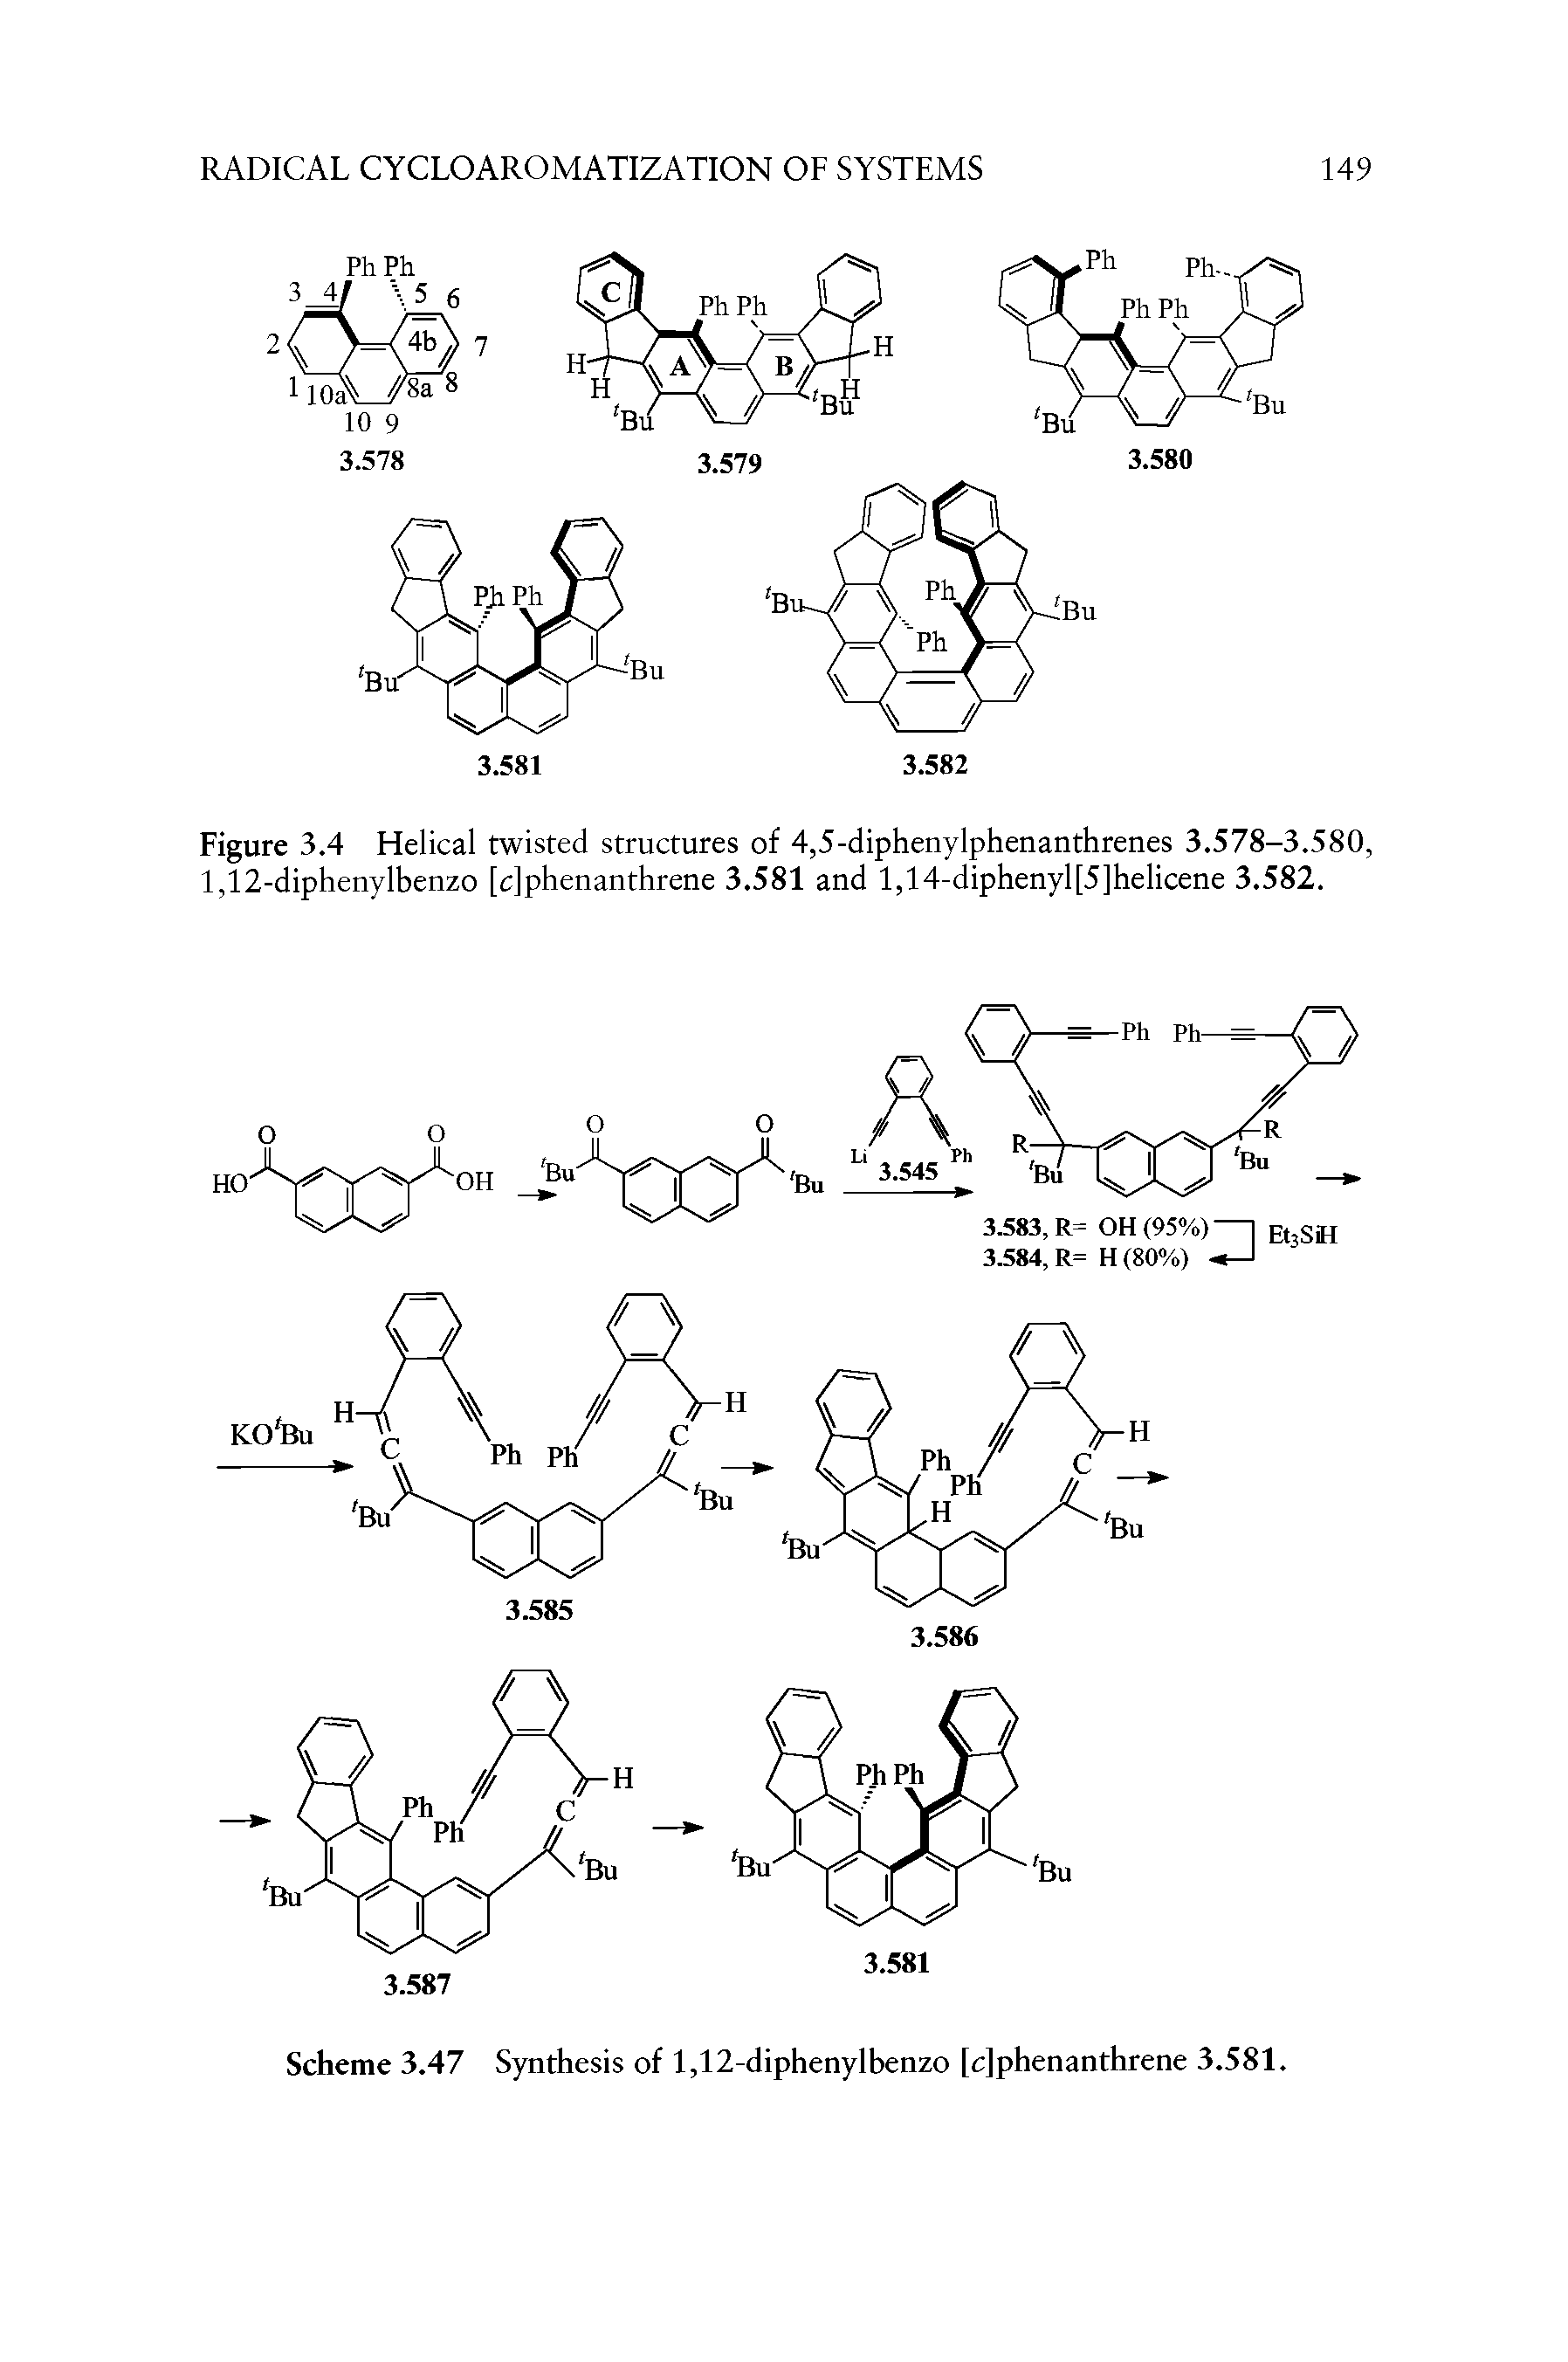 Figure 3.4 Helical twisted structures of 4,5-diphenylphenanthrenes 3.578-3.580, 1,12-diphenylbenzo [c]phenanthrene 3.581 and l,14-diphenyl[5]helicene 3.582.